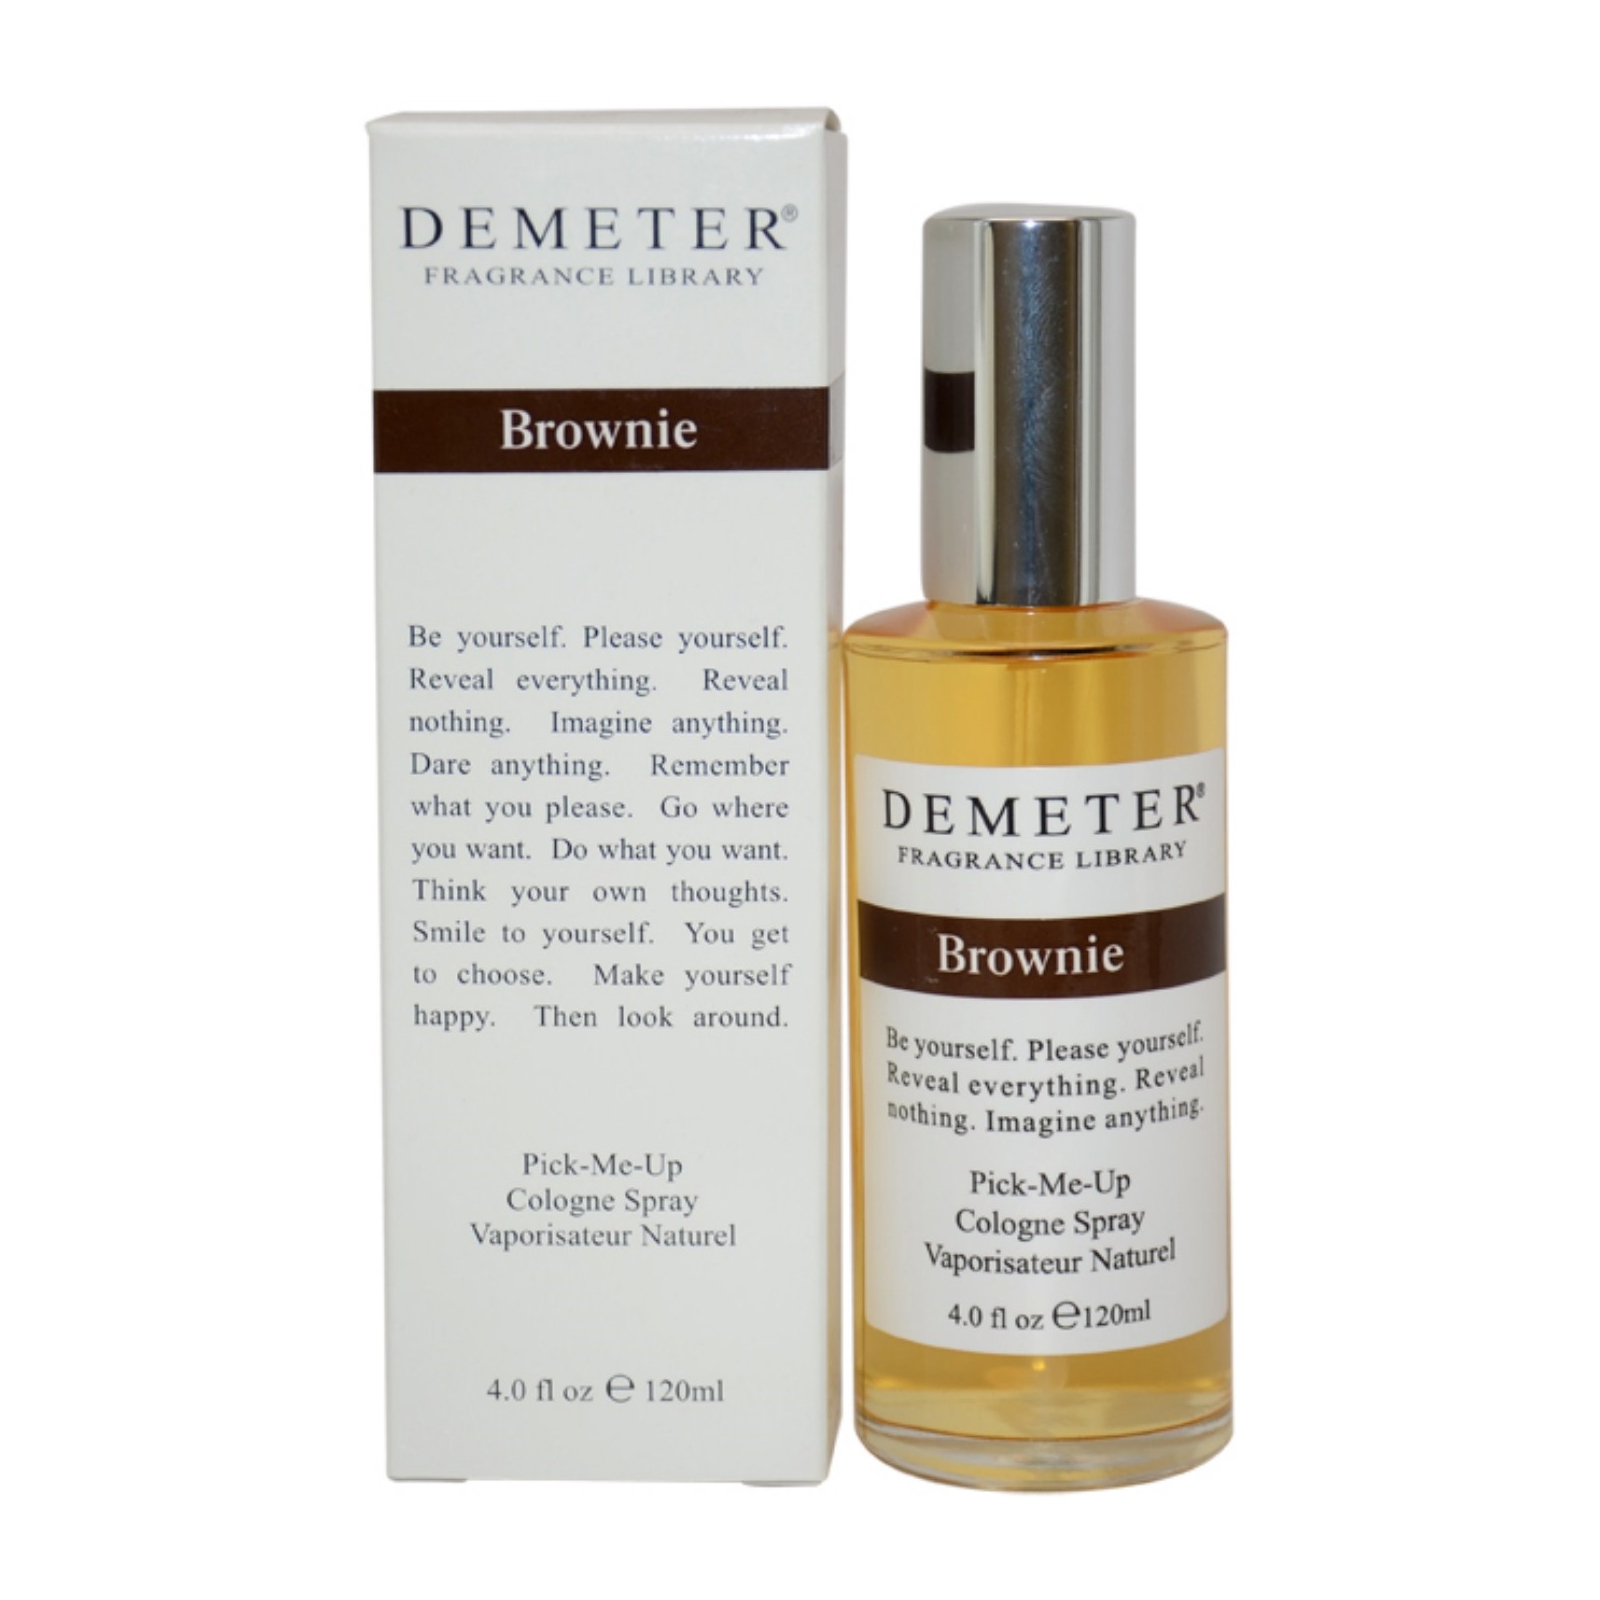 Demeter Brownie by  for Women - 4 oz Cologne Spray